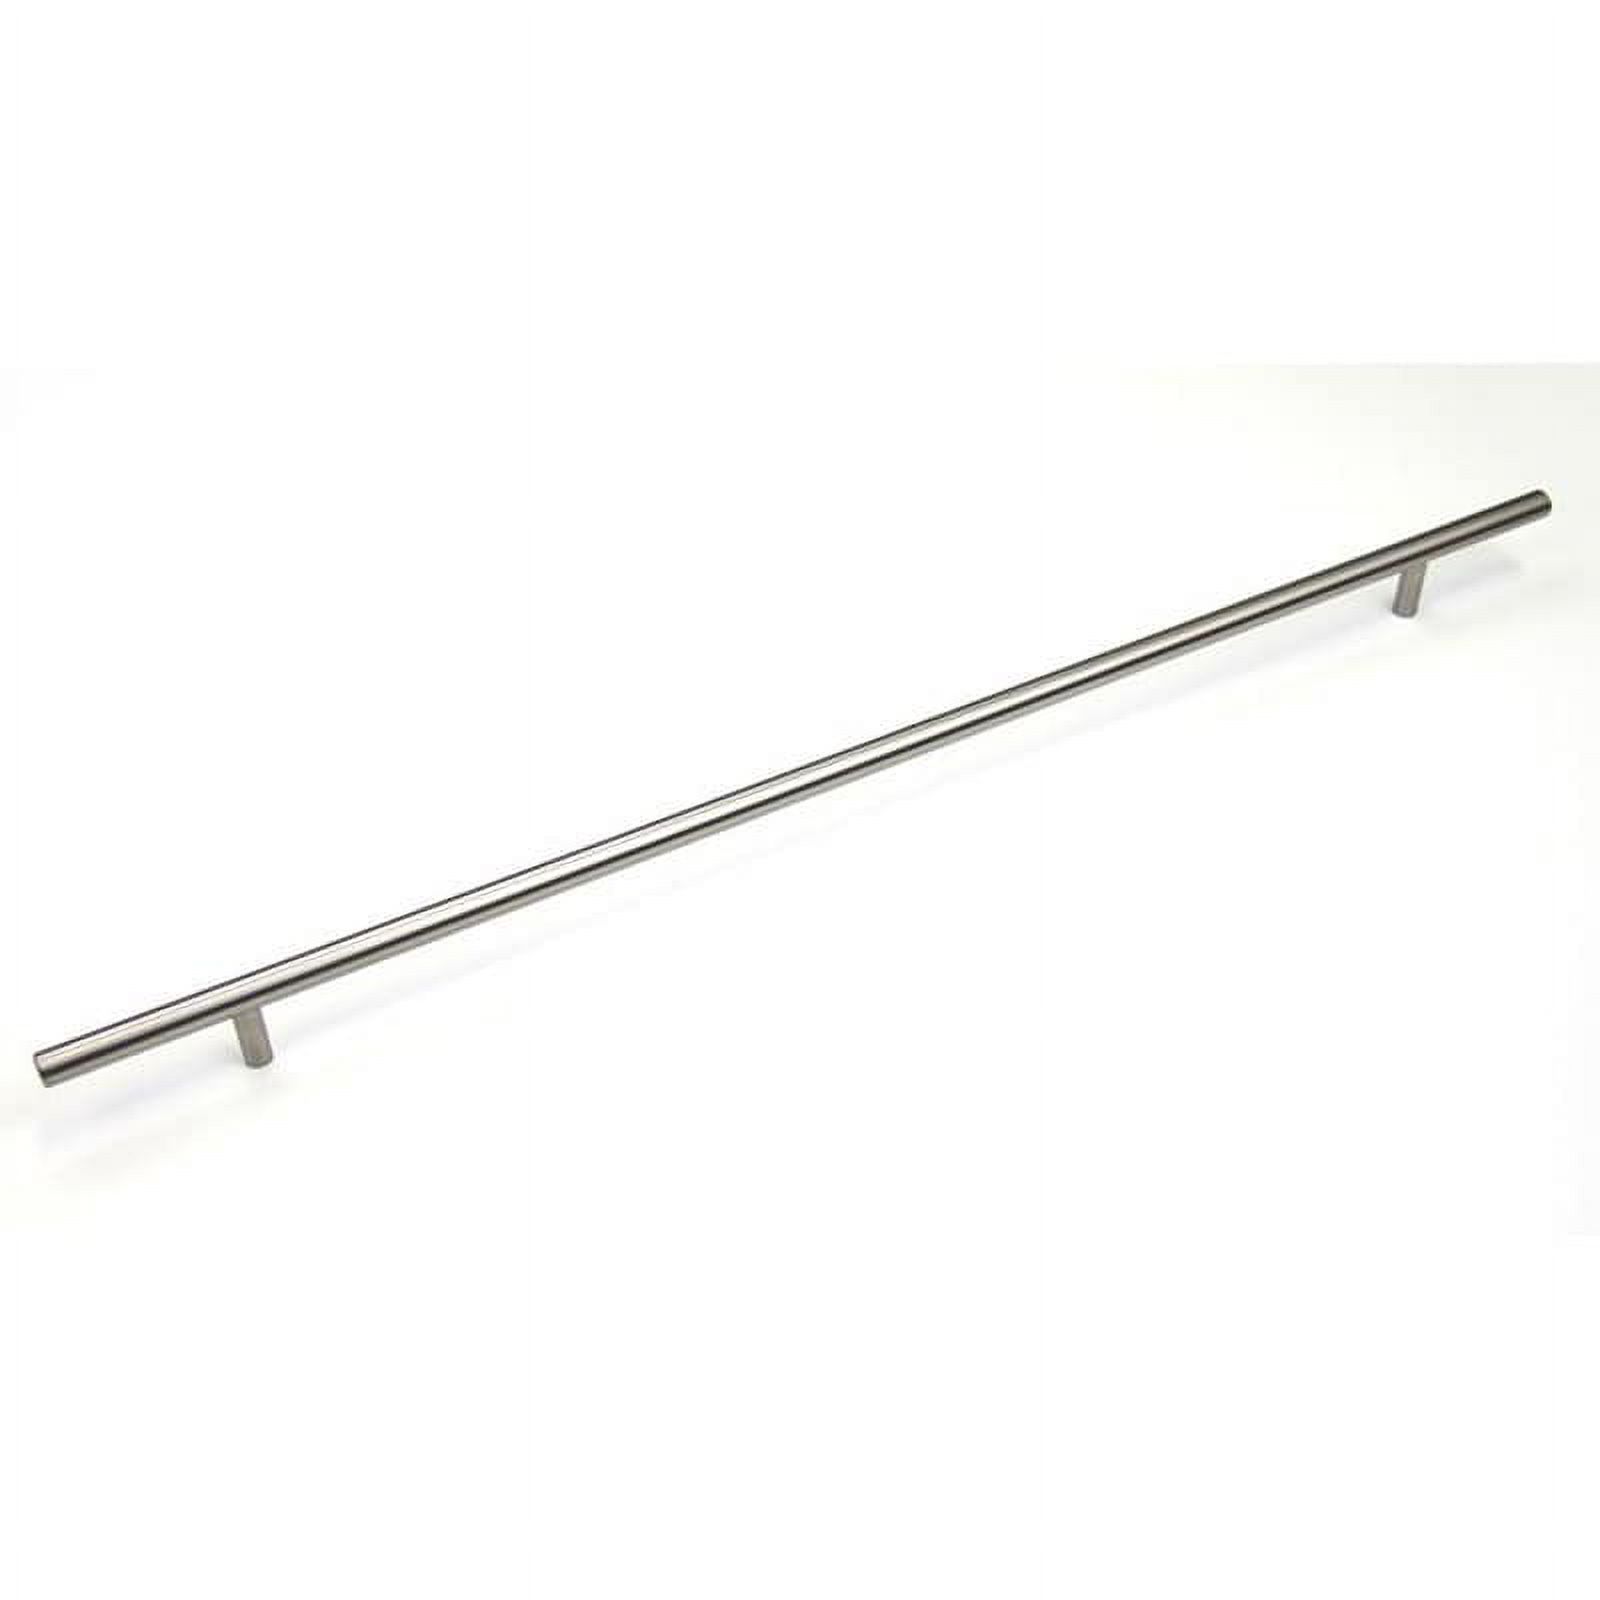 22" Solid Stainless Steel Cabinet Bar Pull Handles 22-inch Stainless Steel Cabinet Bar Pull Handles (Case of 10) - image 2 of 3